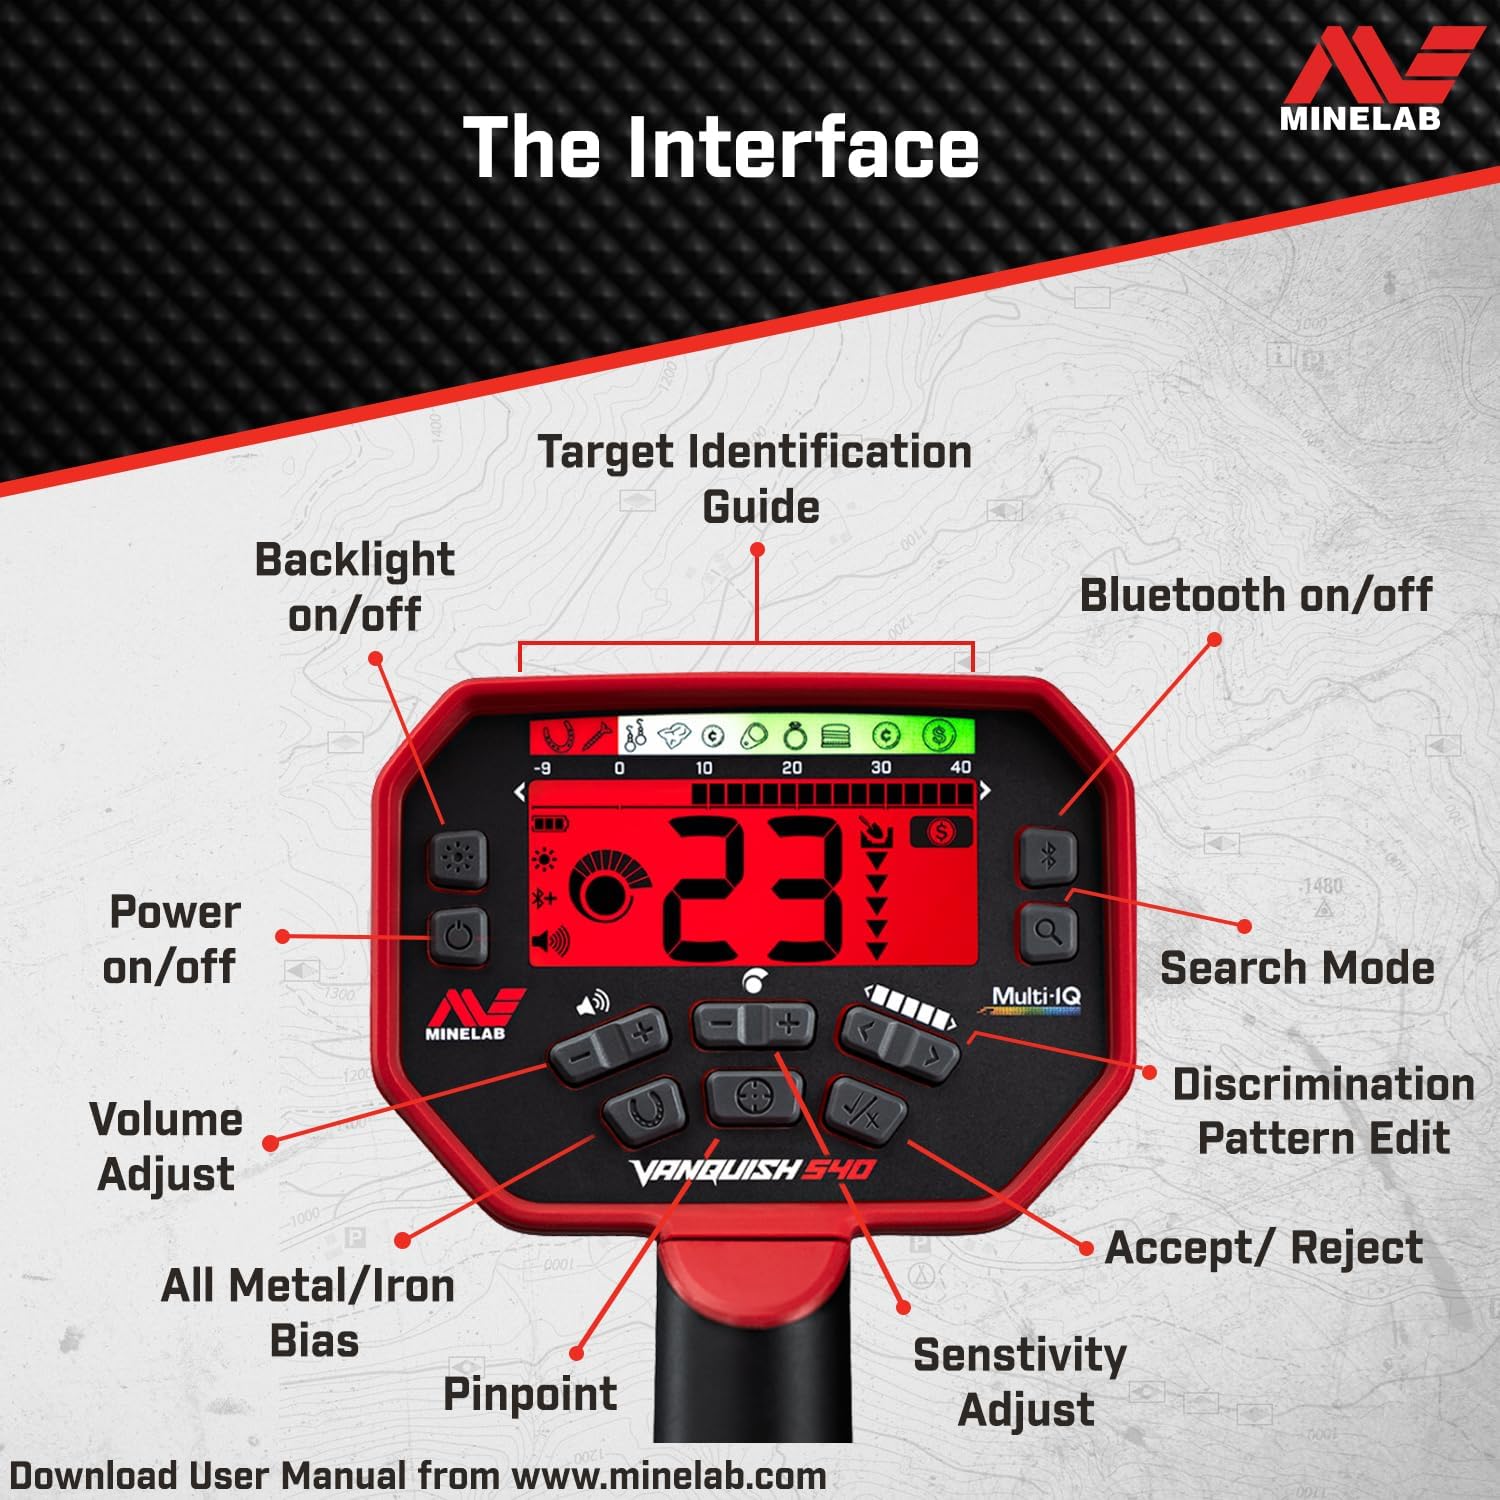 Minelab Vanquish 540 Multi-Frequency Pinpointing Metal Detector